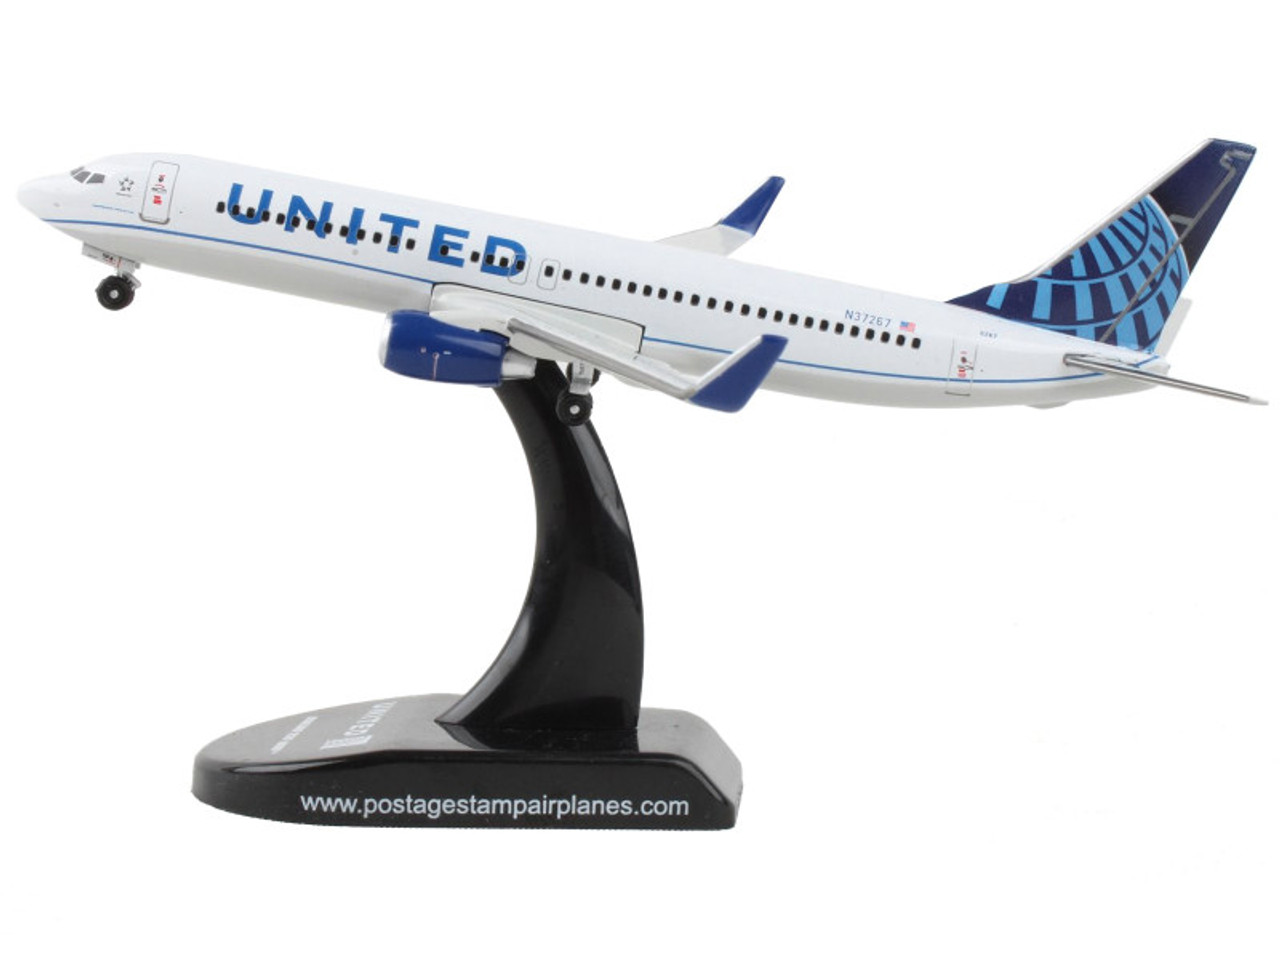 Boeing 737-800 Next Generation Commercial Aircraft "United Airlines" 1/300 Diecast Model Airplane by Postage Stamp